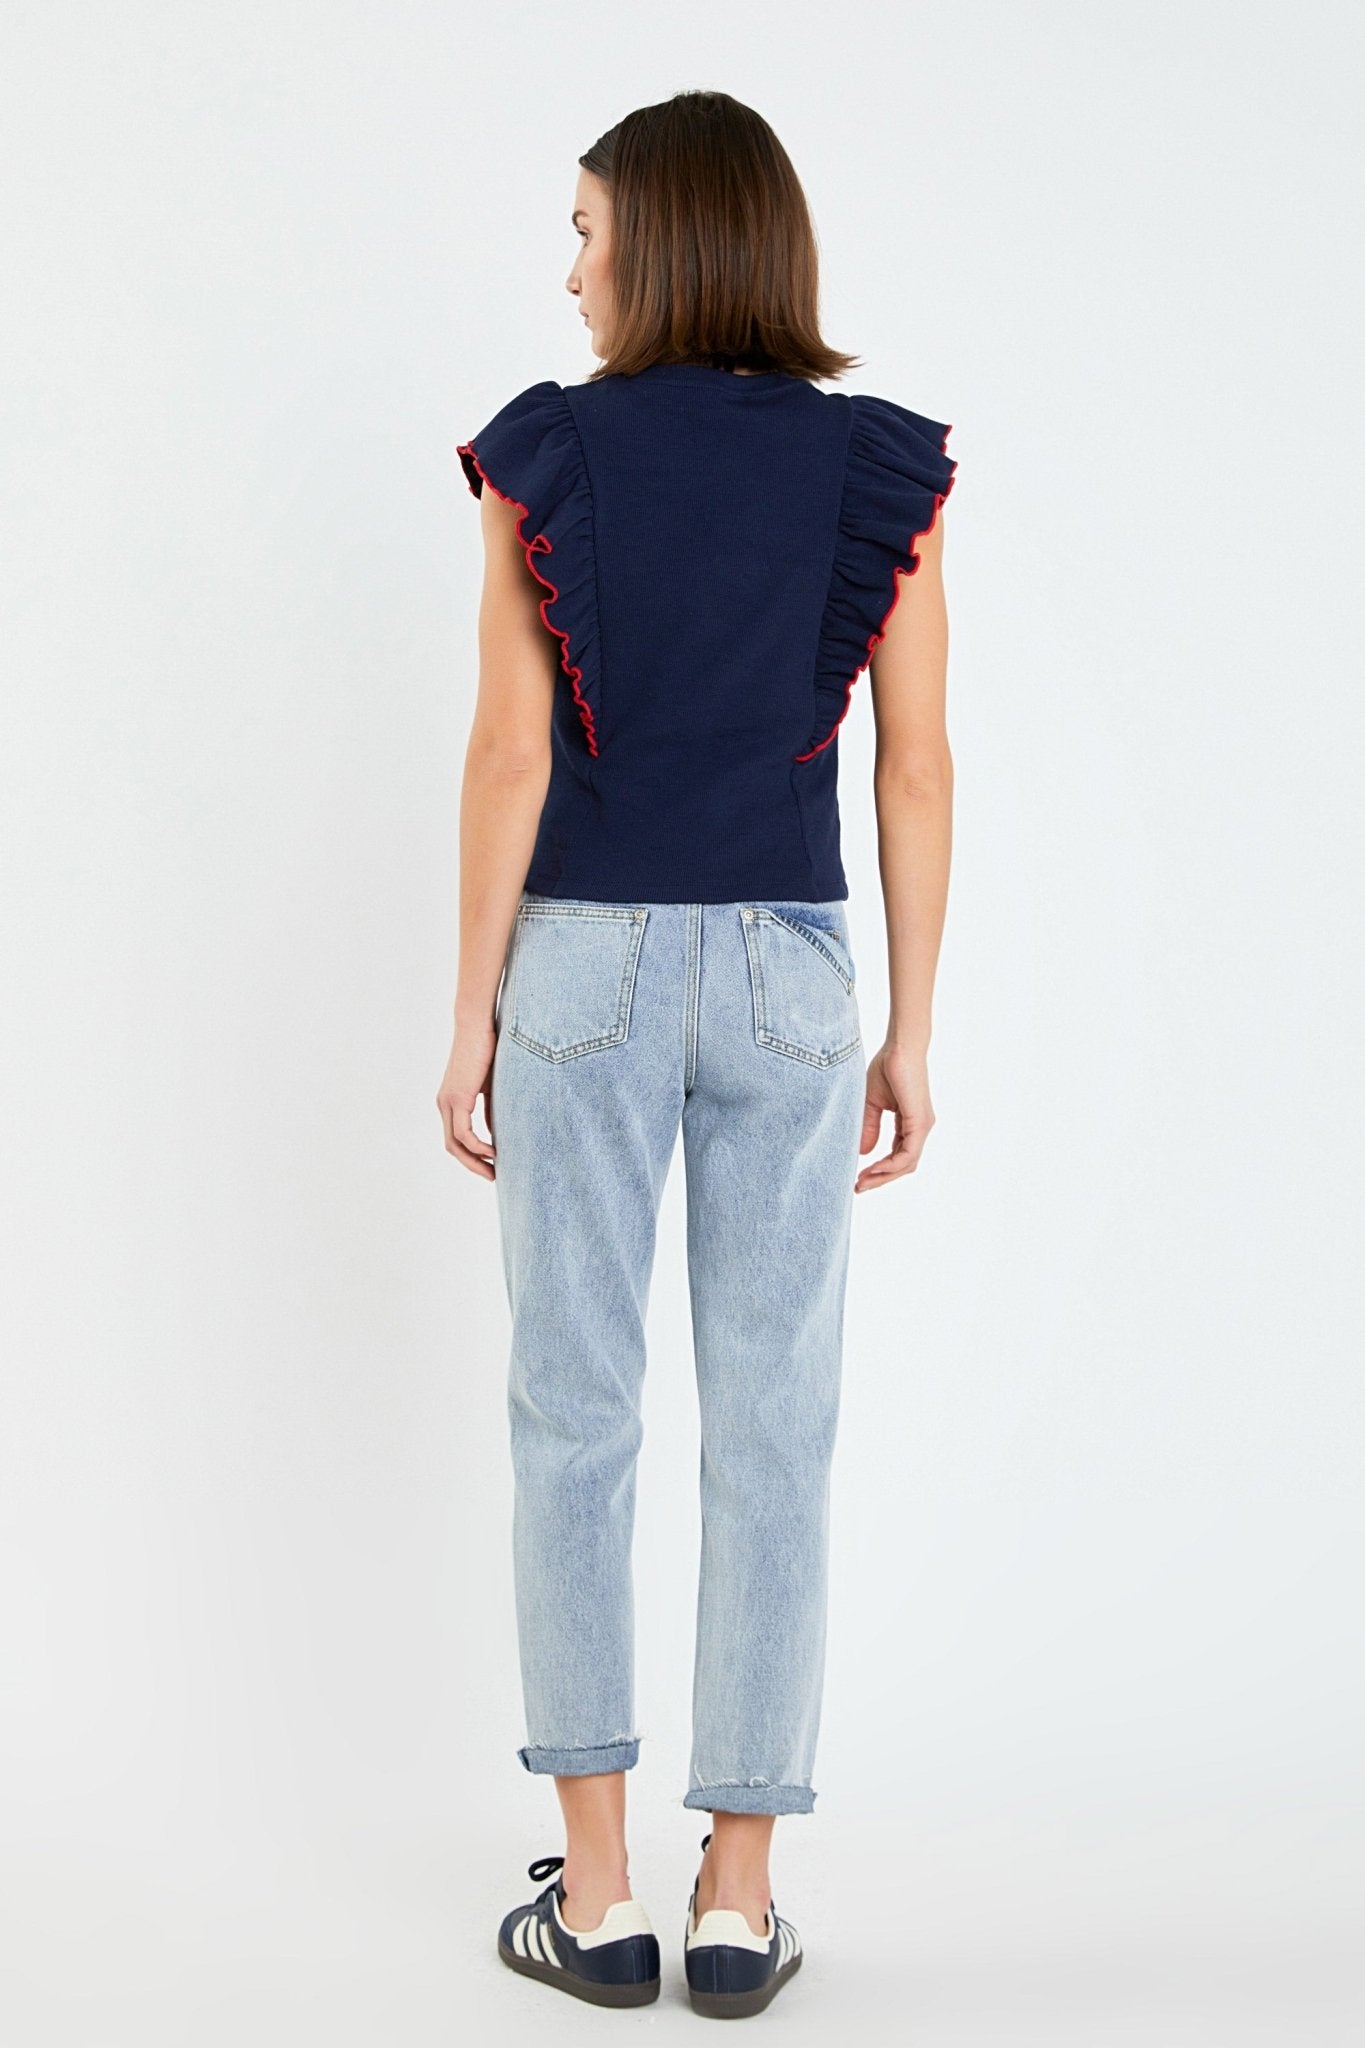 Contrast Merrow Detail Ruffled Knit Top - English Factory - Color Game